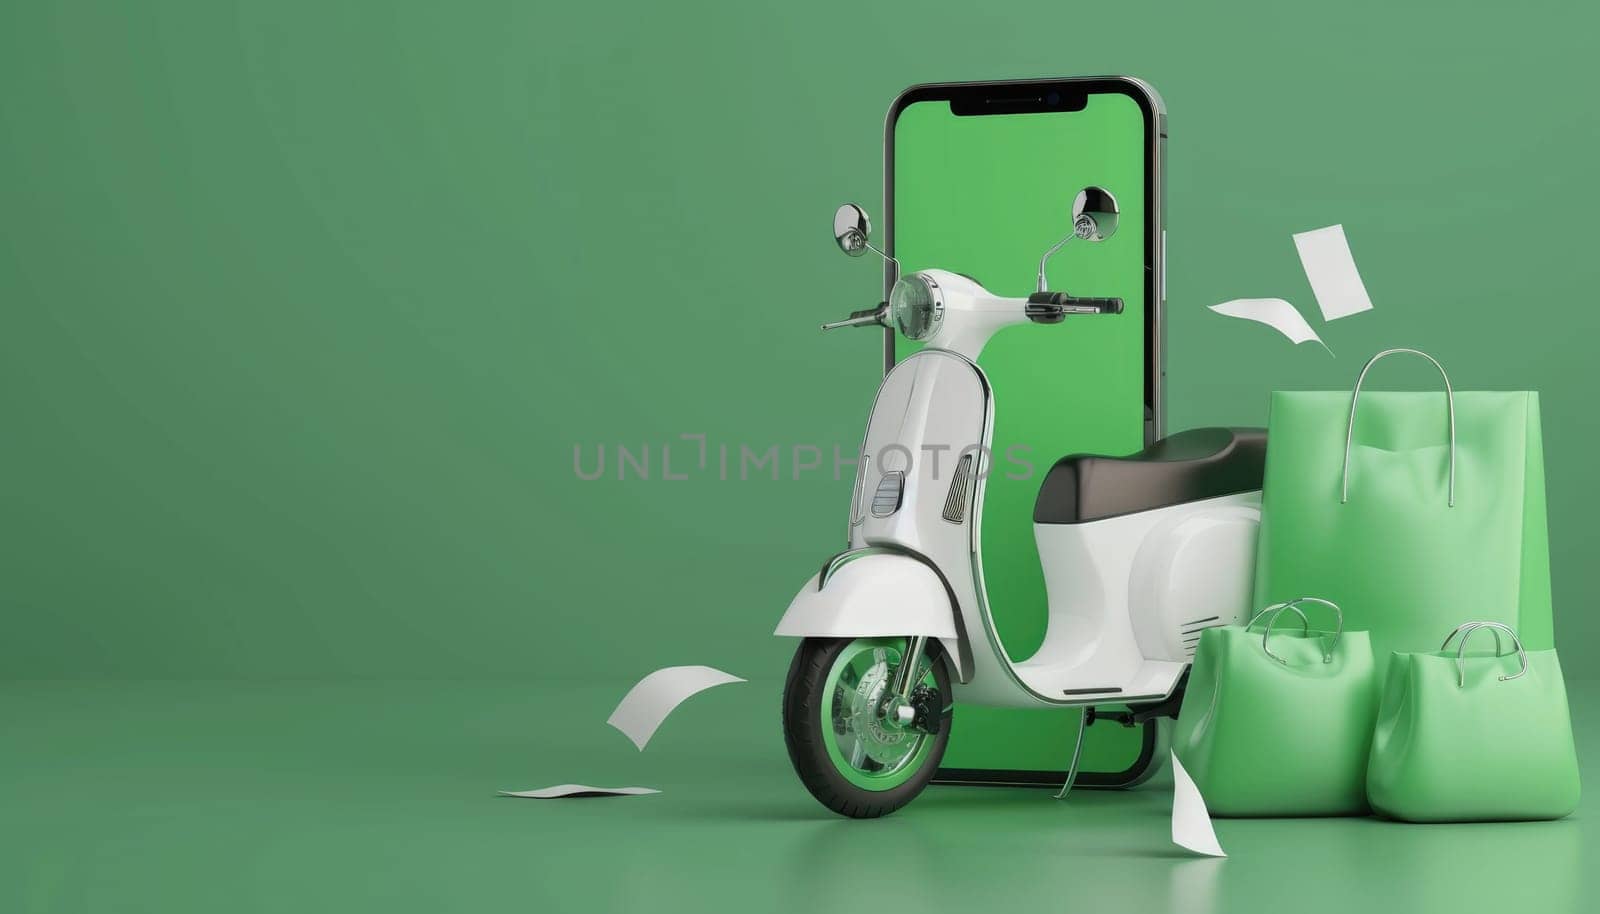 Green food bag or box is placed on white motorcycle or scooter. and all on smartphone with green screen and receipt paper by AI generated image by wichayada